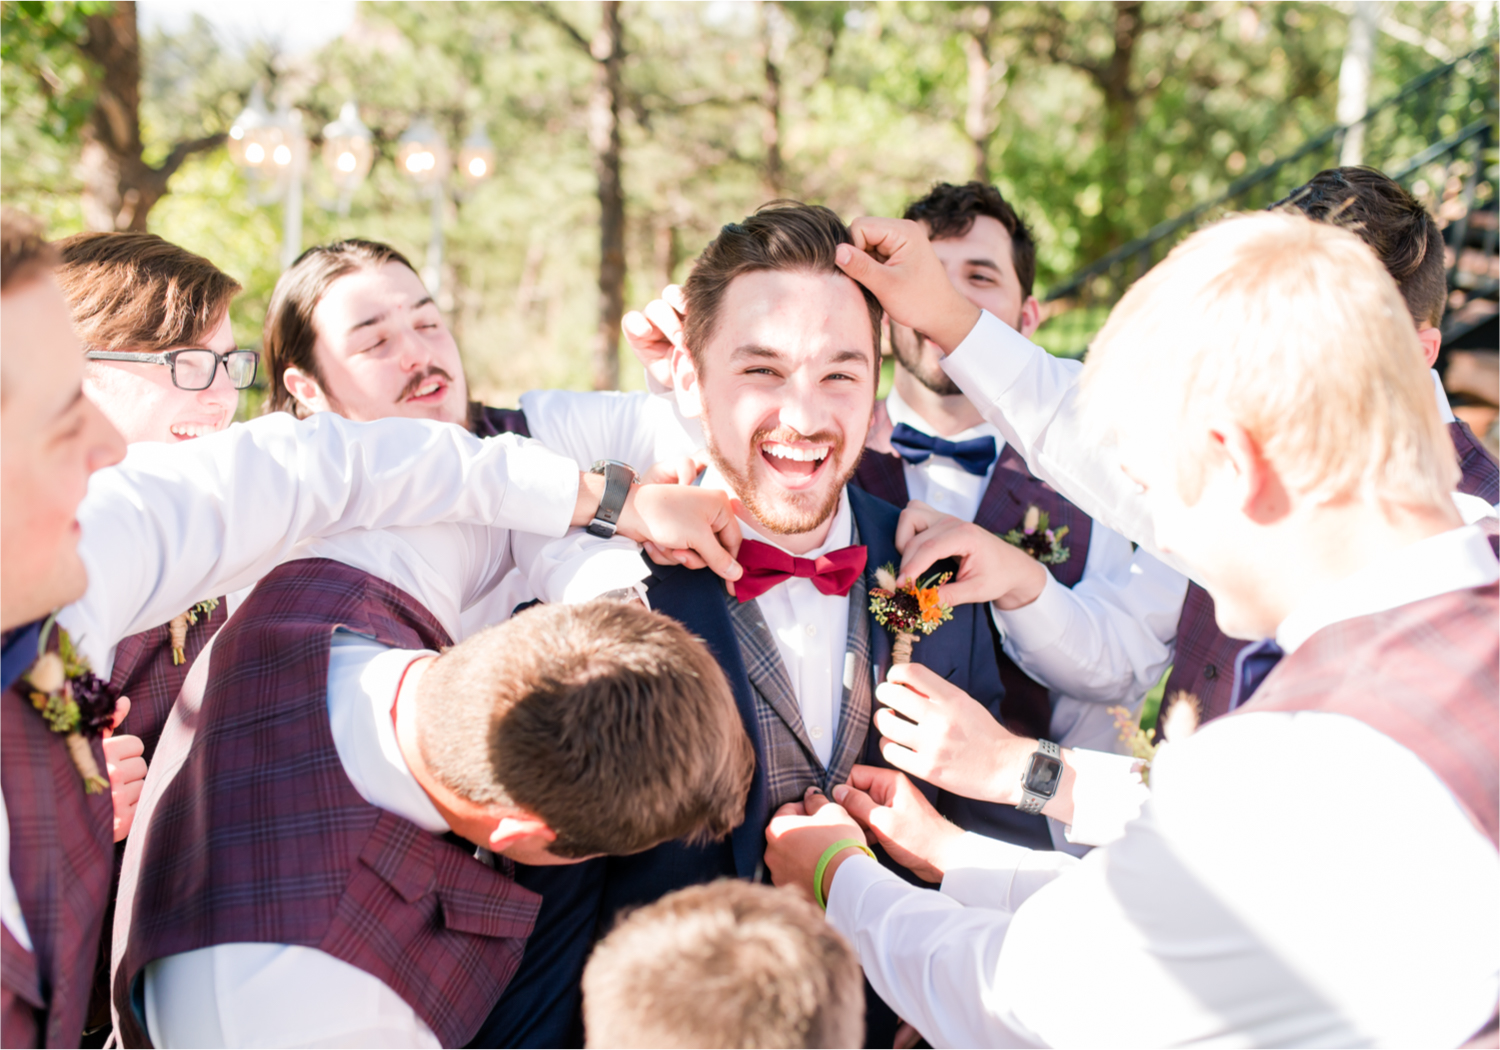 Romantic Whimsical Wedding at the Lionscrest Manor in Lyons, CO | Britni Girard Photography - Wedding Photo and Video Team | Rustic Fall Decor mixed in Burgundy, Blush, Gold and Sage | Groomsmen Getting Ready | Custom Suit from Jos. a Banks